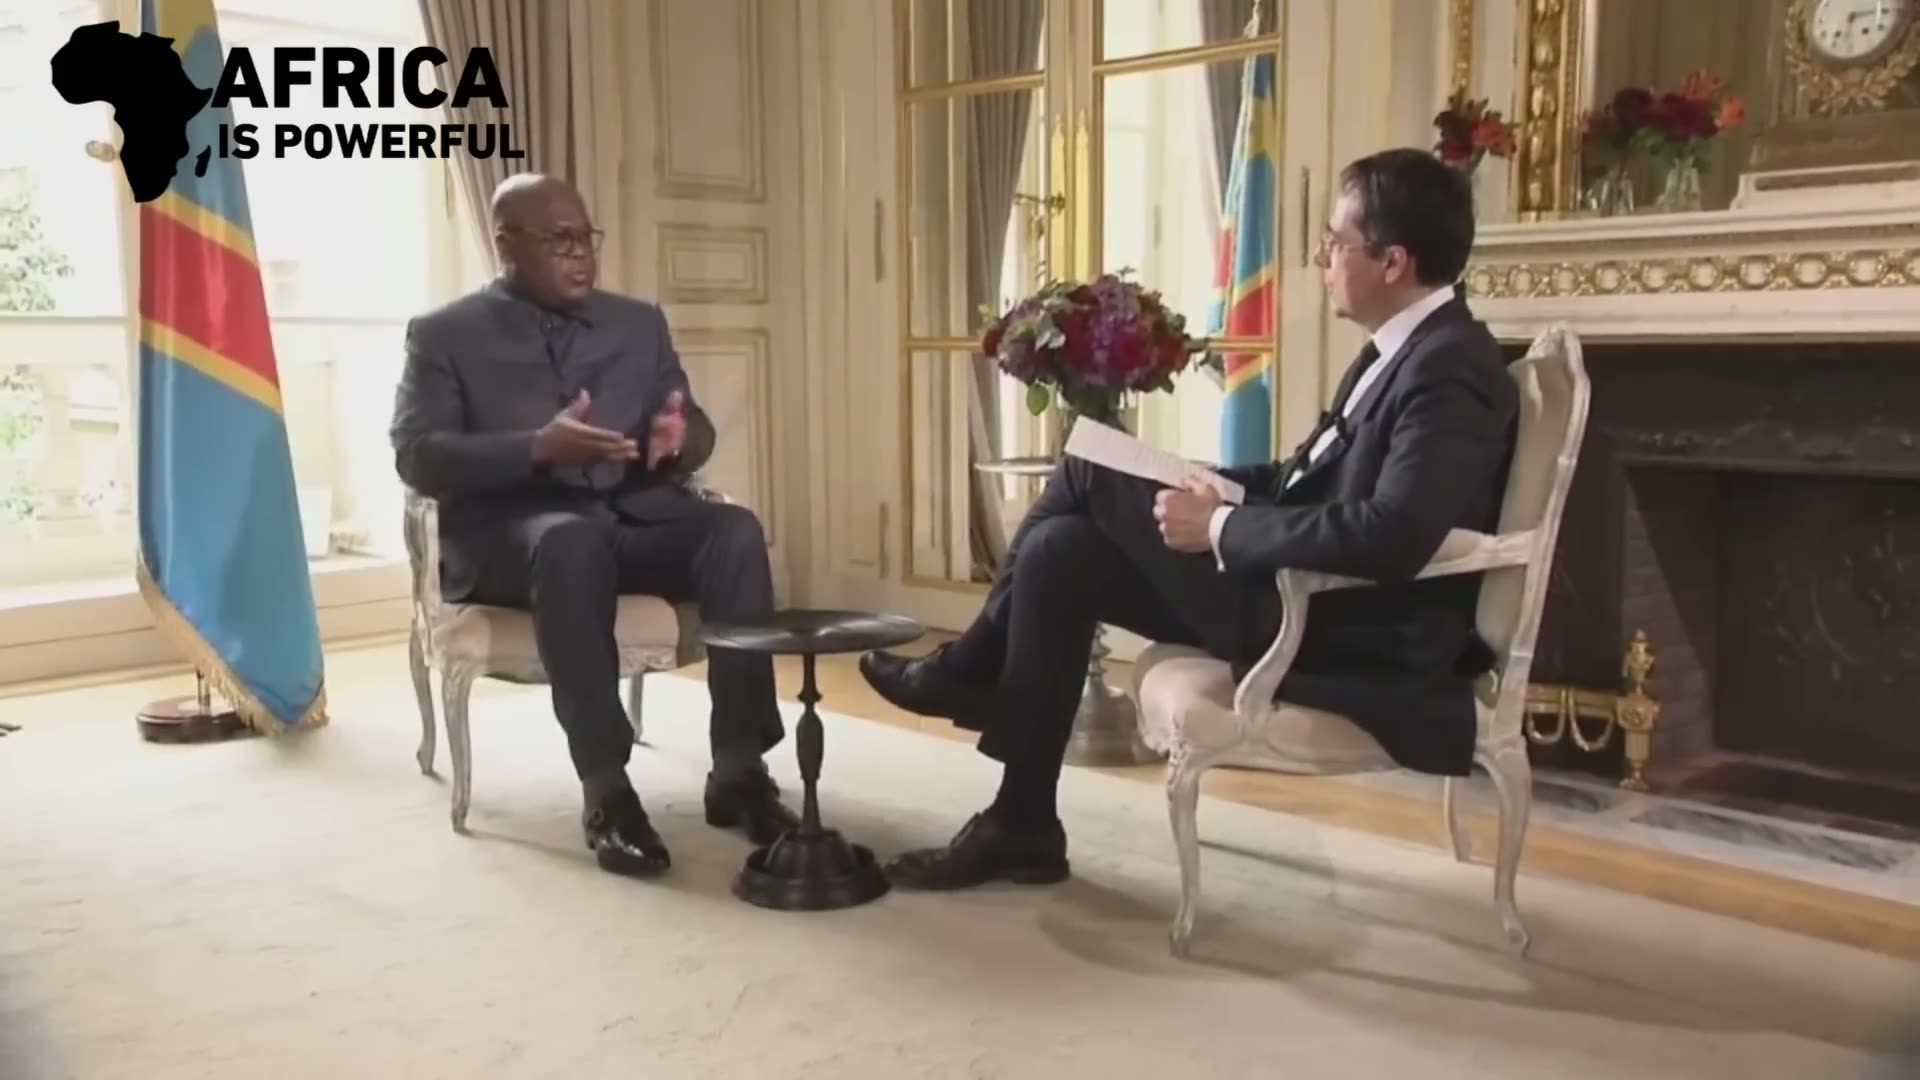 The West in PANICK as DR Congo's President Tshisekedi says DRC is turning to Russia for help